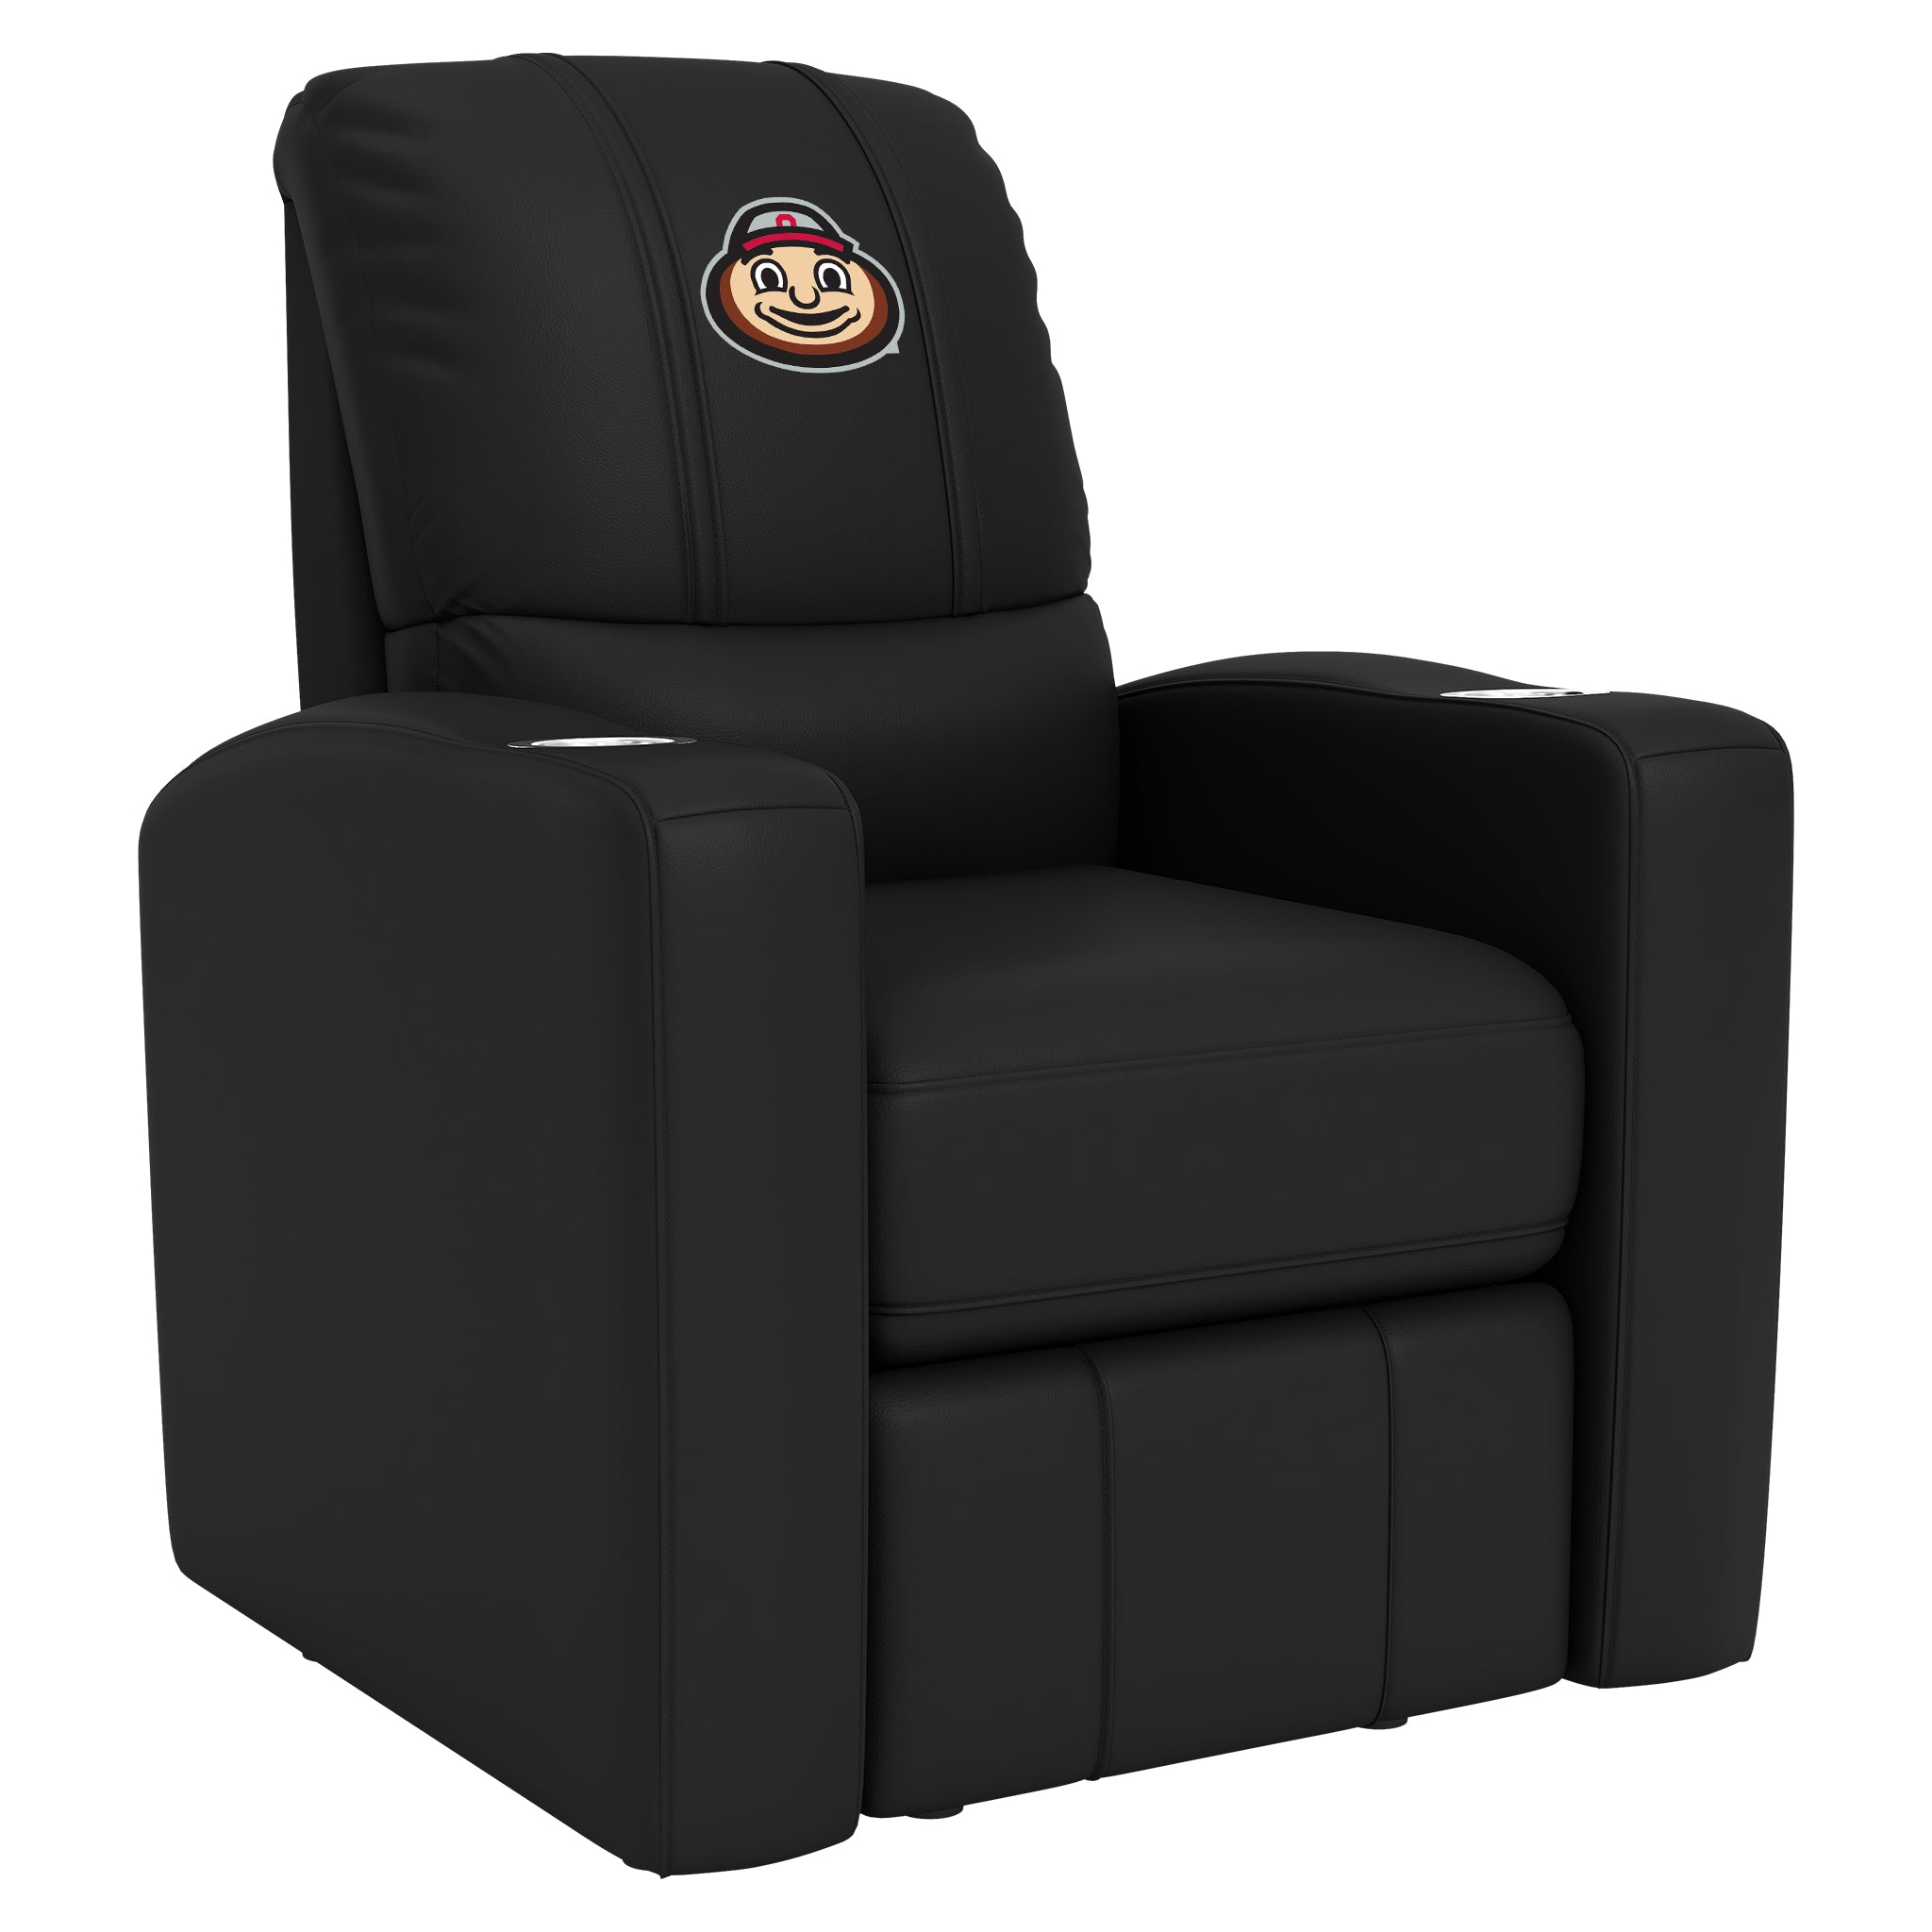 Ohio State Stealth Recliner with Ohio State Buckeyes Brutus Head Logo